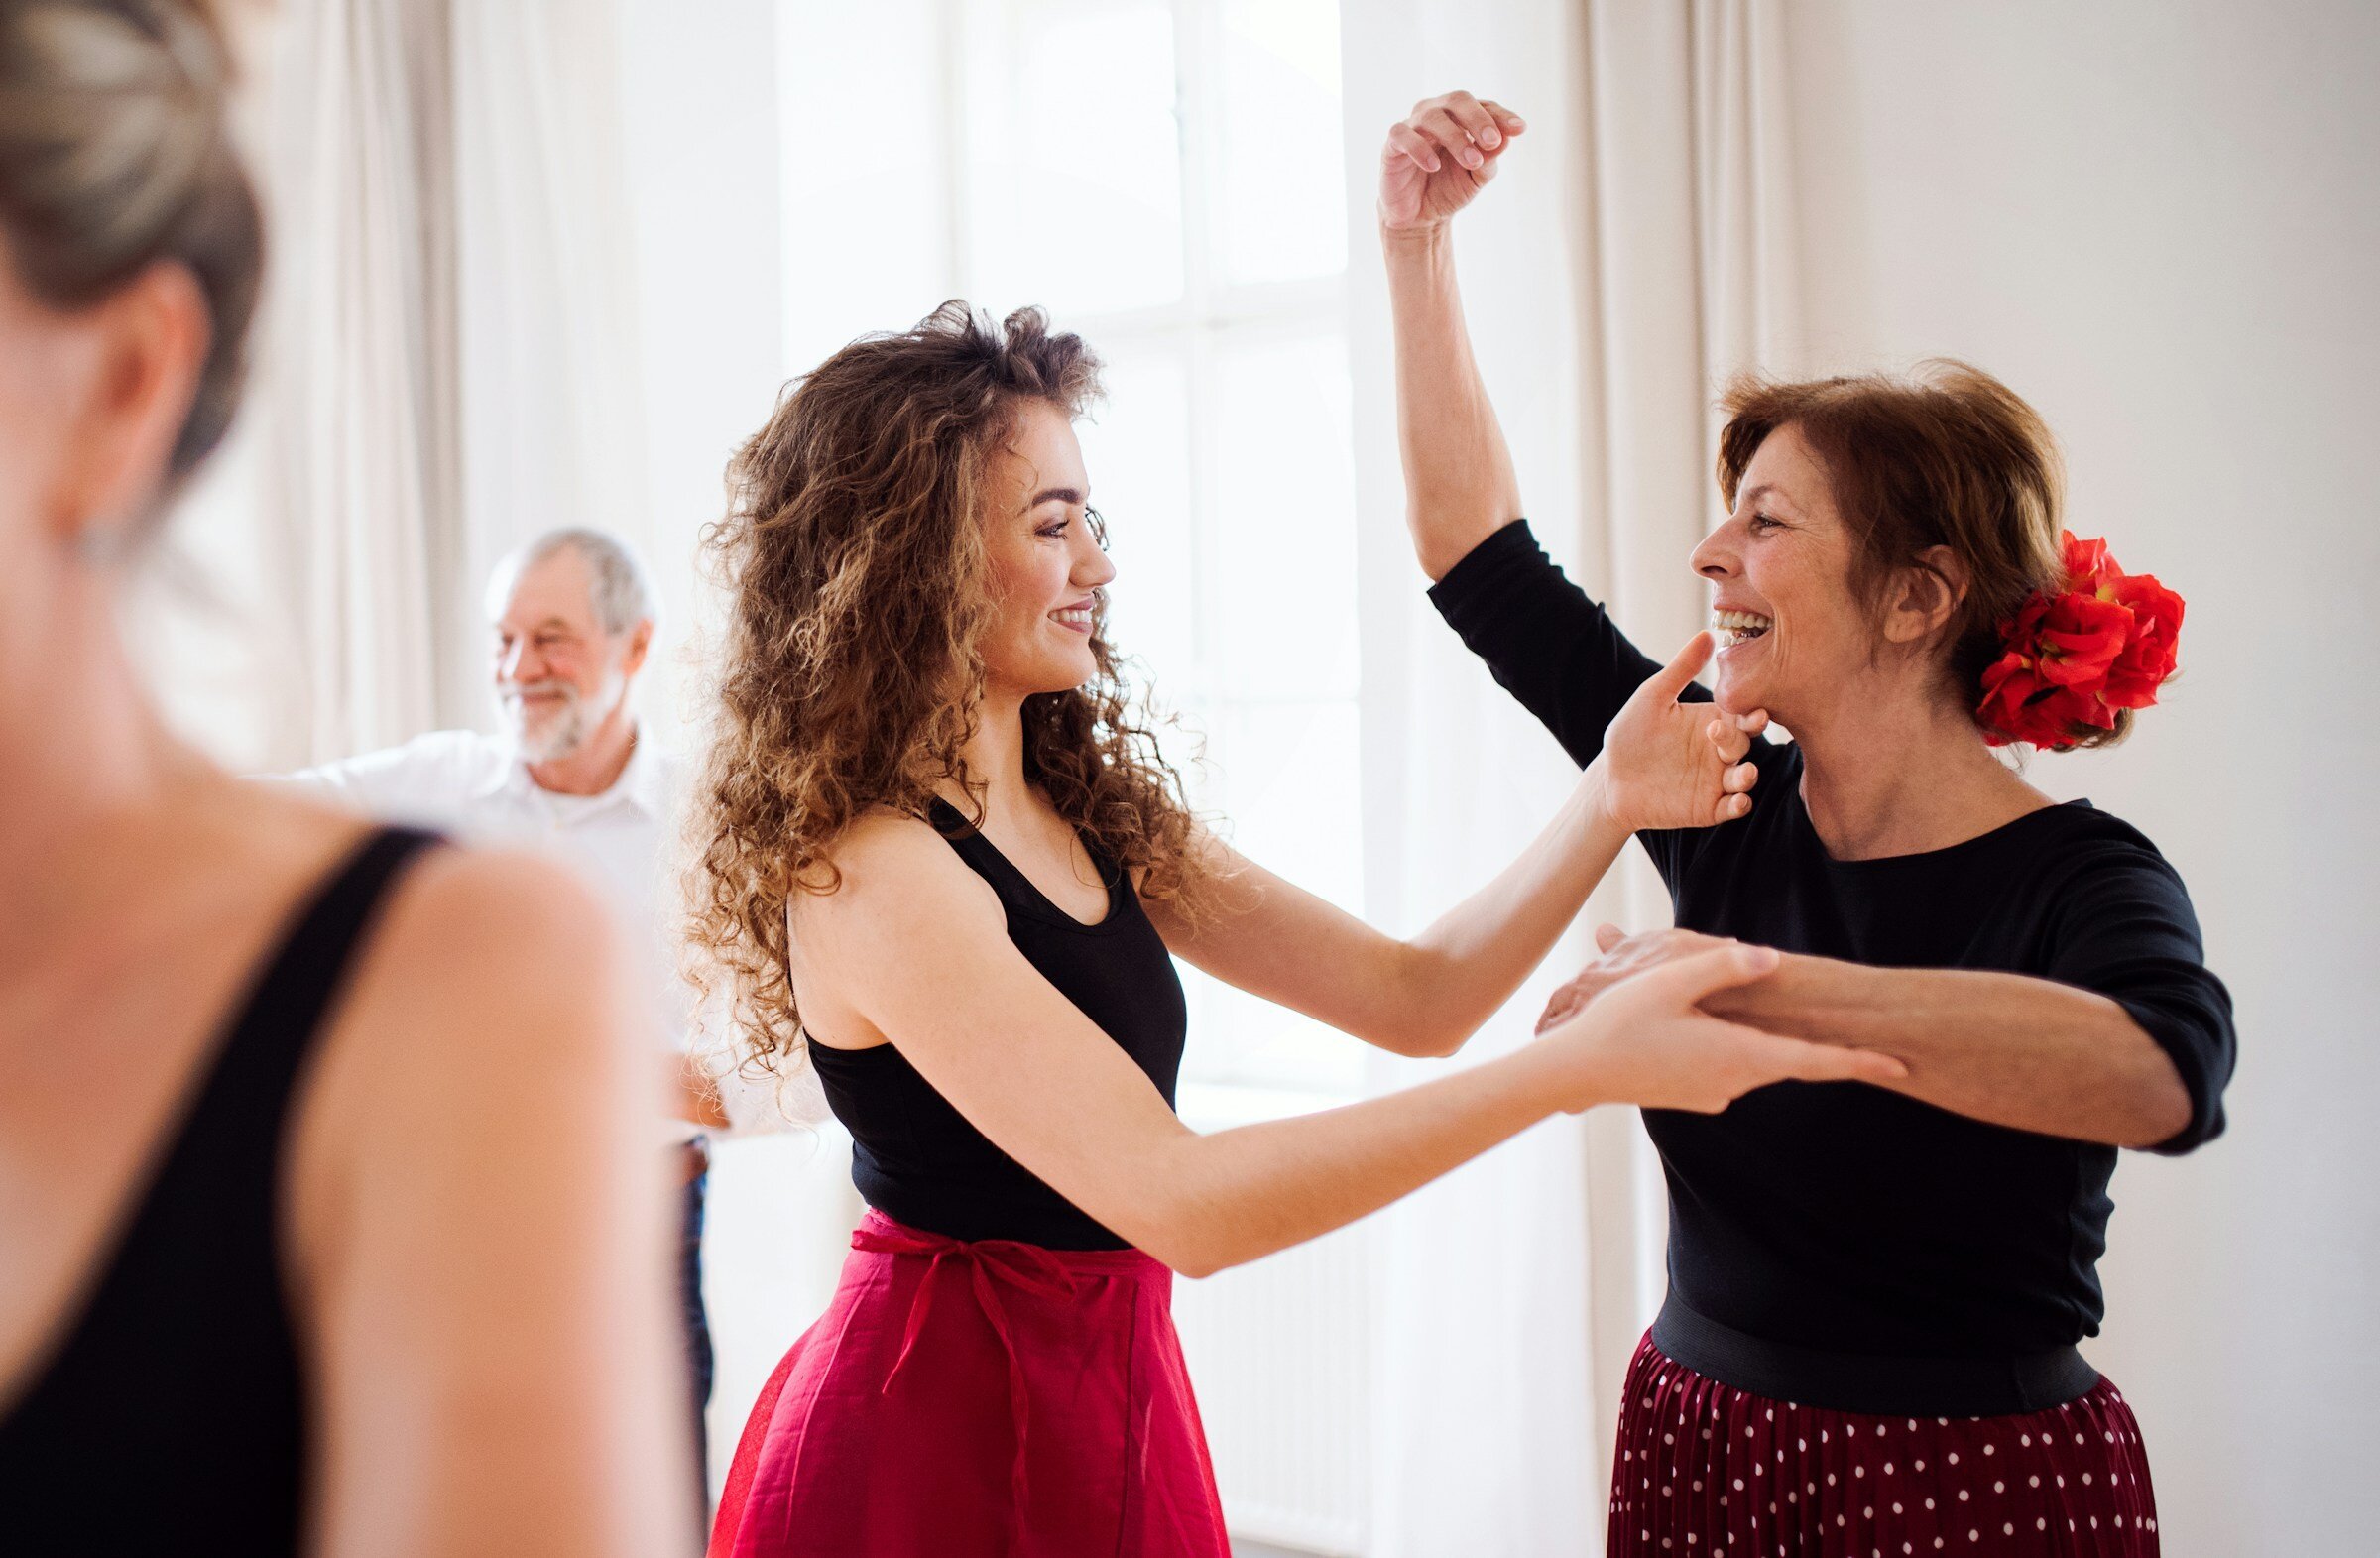 Best Dance Exercises for Seniors Looking to Stay Active & Healthy